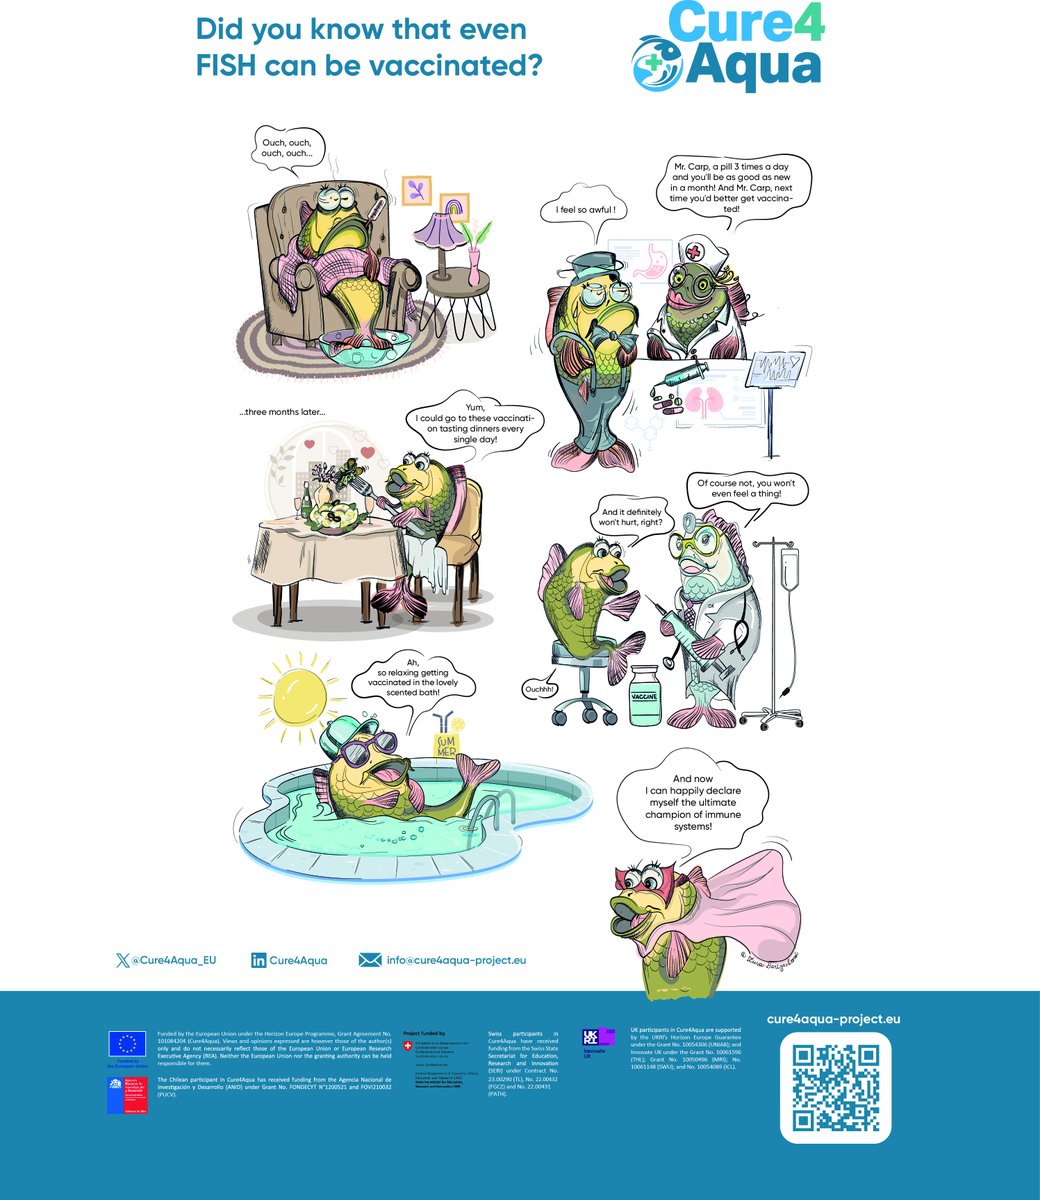 🐟 Did you know that fish can be vaccinated too?  

 🩺Our new cartoon highlights in a fun way how vaccination can help control fish diseases, increase their welfare, and contribute to food security.  

 Check it out! #FishHealth #FishWelfare #Aquaculture #FoodSecurity